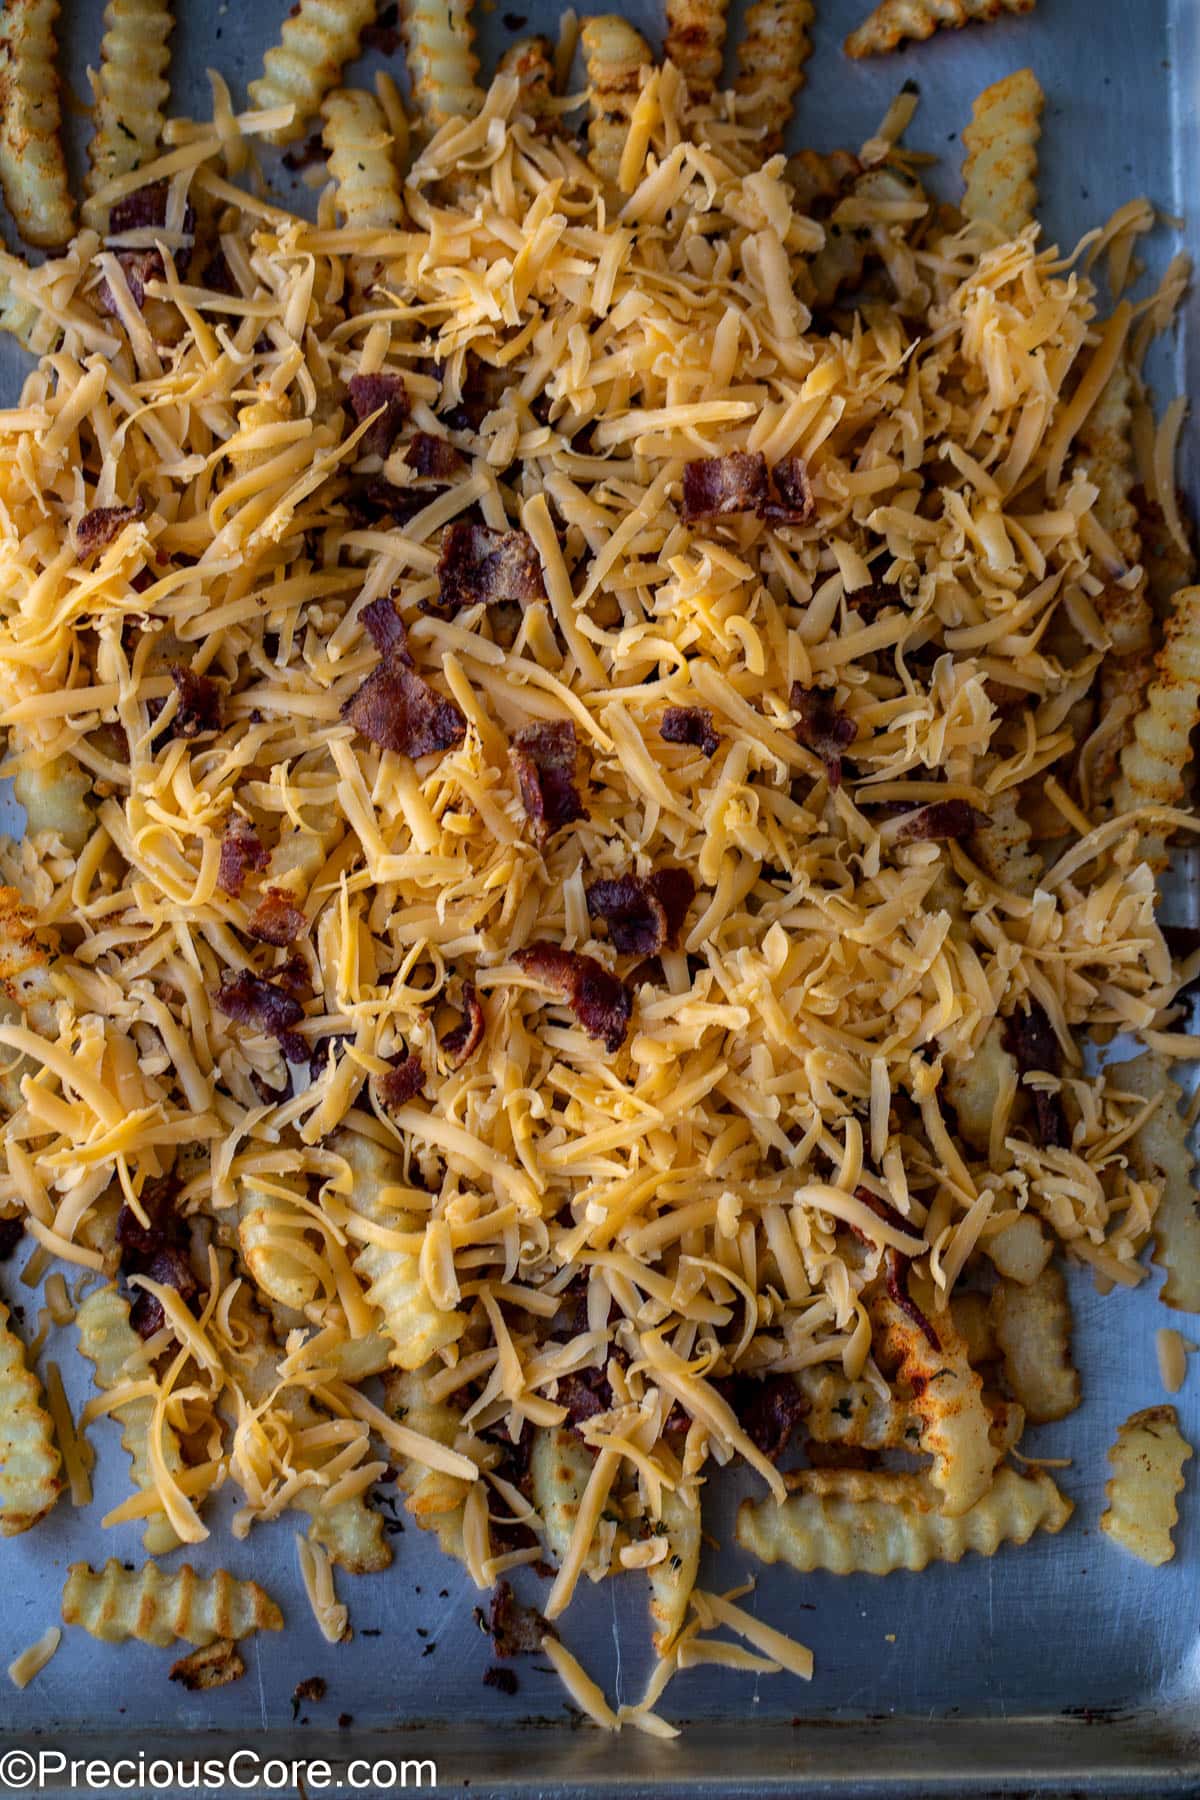 Fries topped with shredded cheddar and bacon.